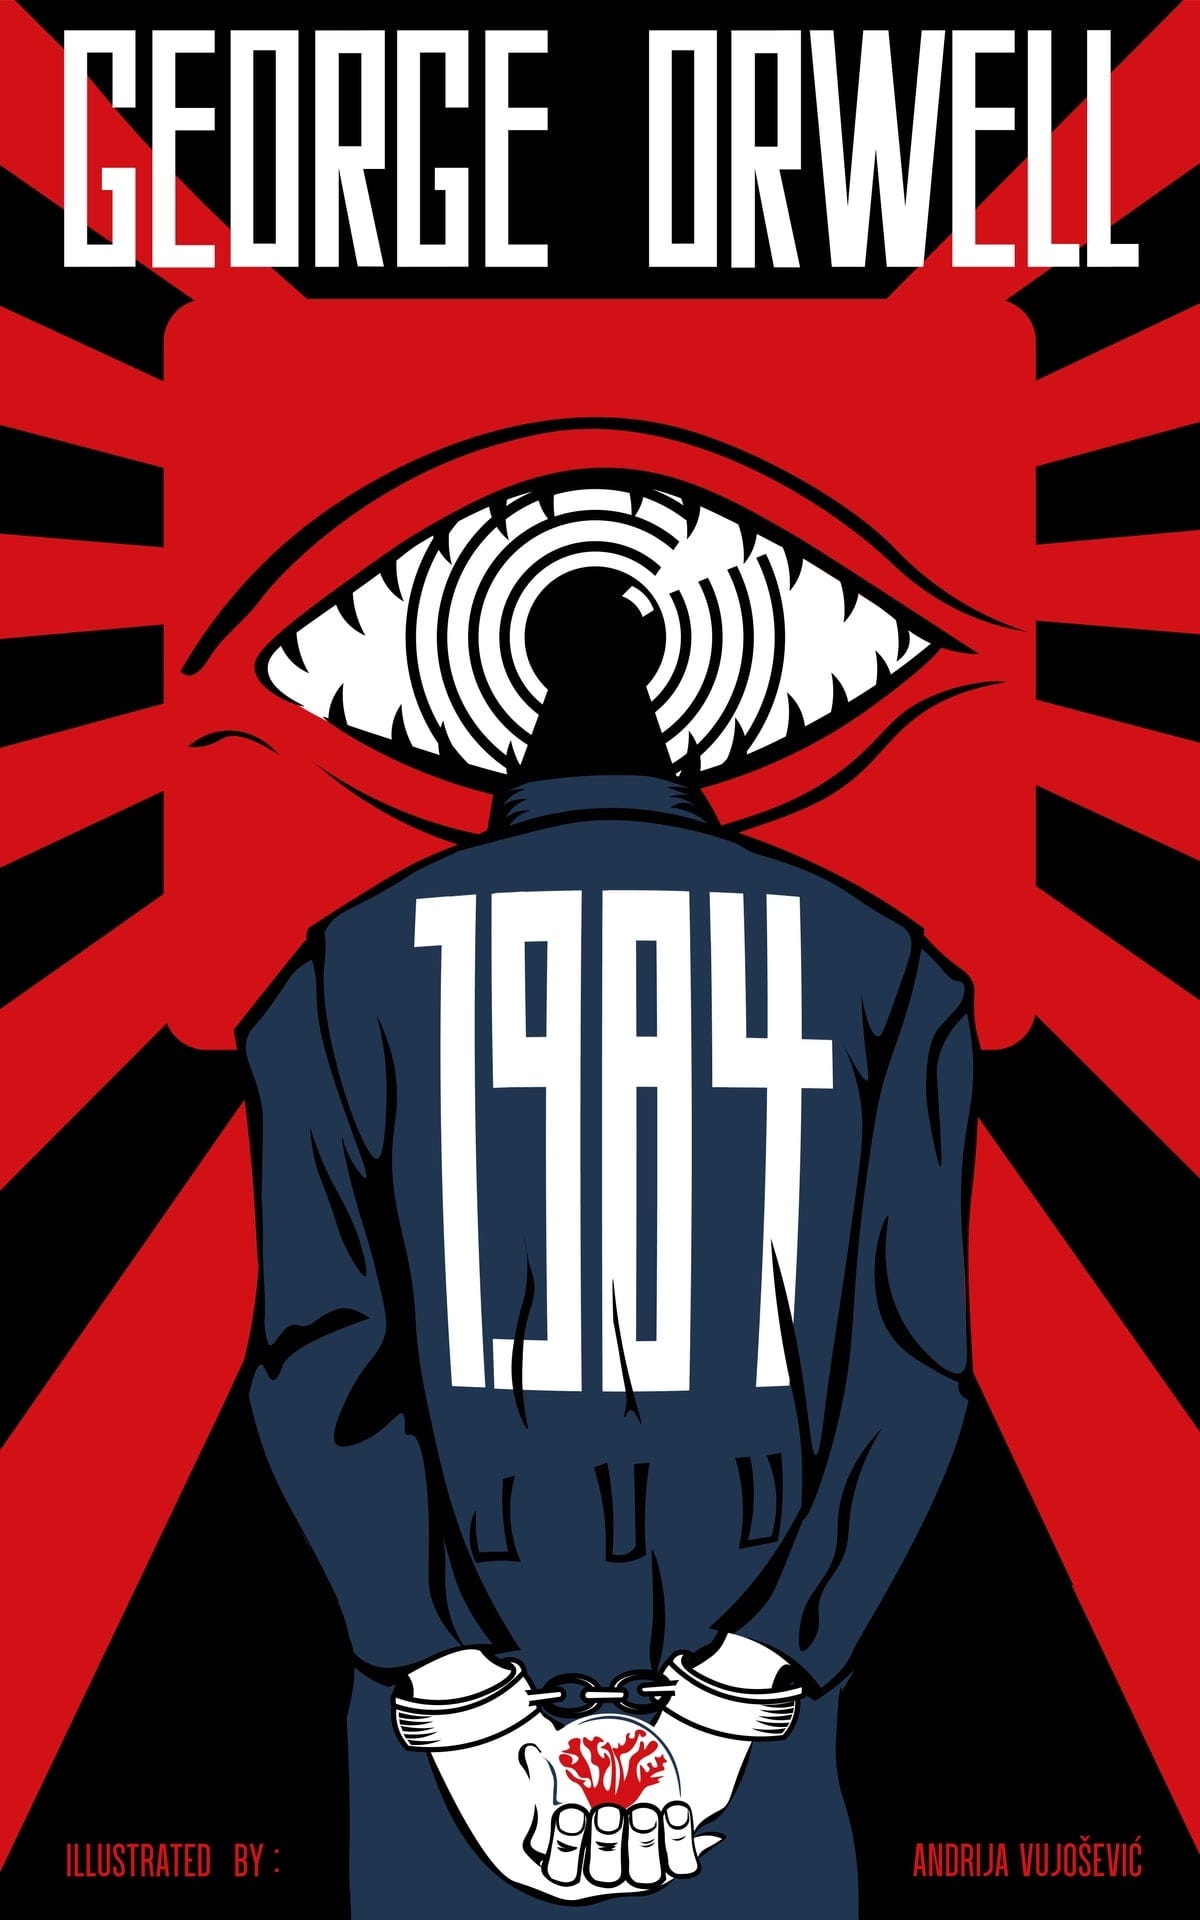 1984 by George Orwell: A Personal Journey Through the Digital Maze”